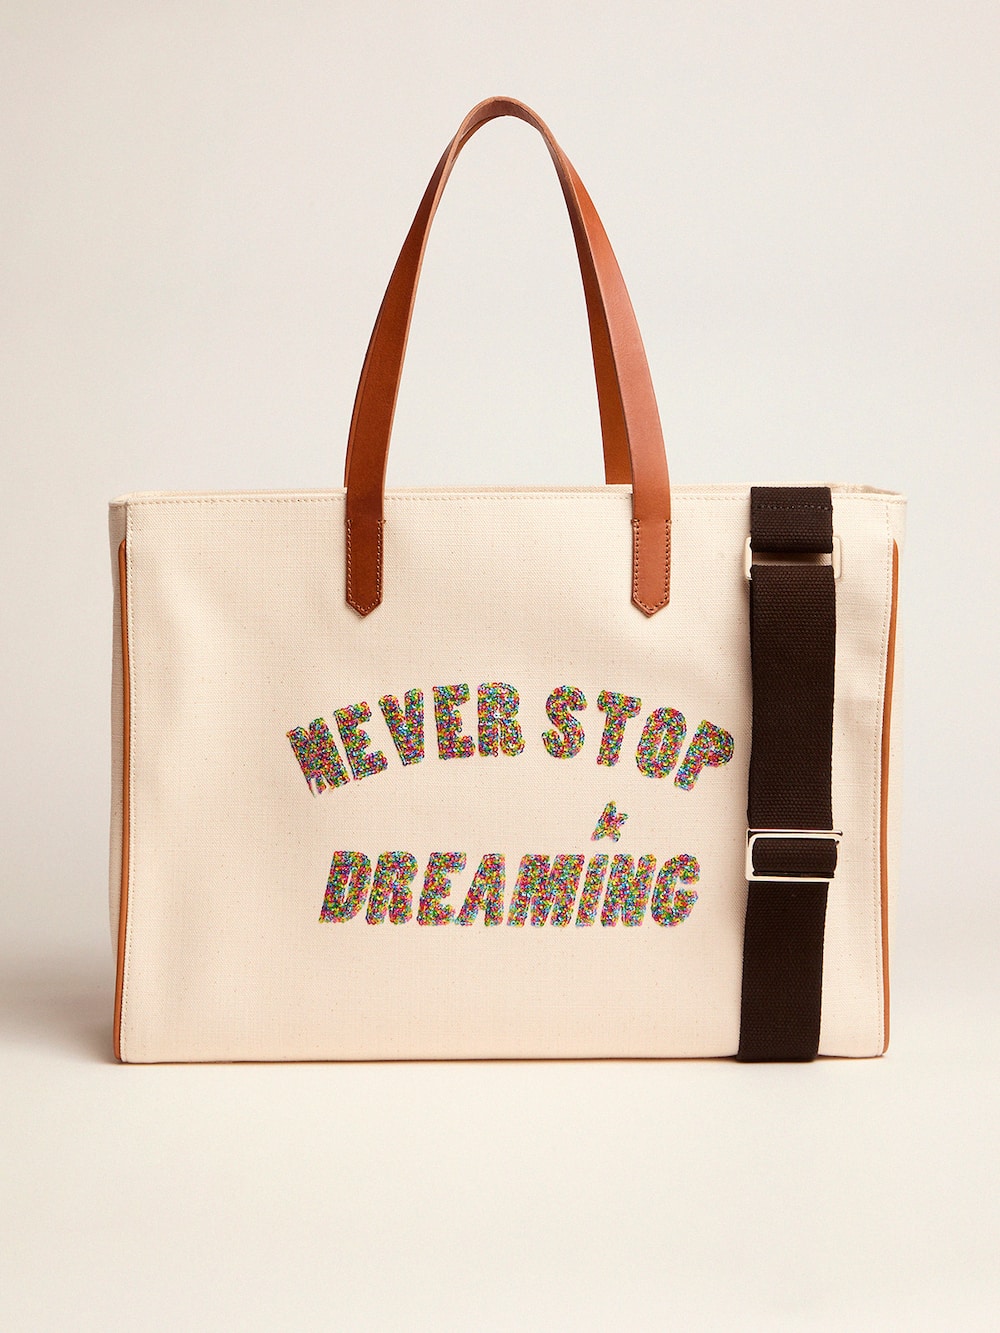 Golden Goose - Sac California East-West Never Stop Dreaming pailleté in 